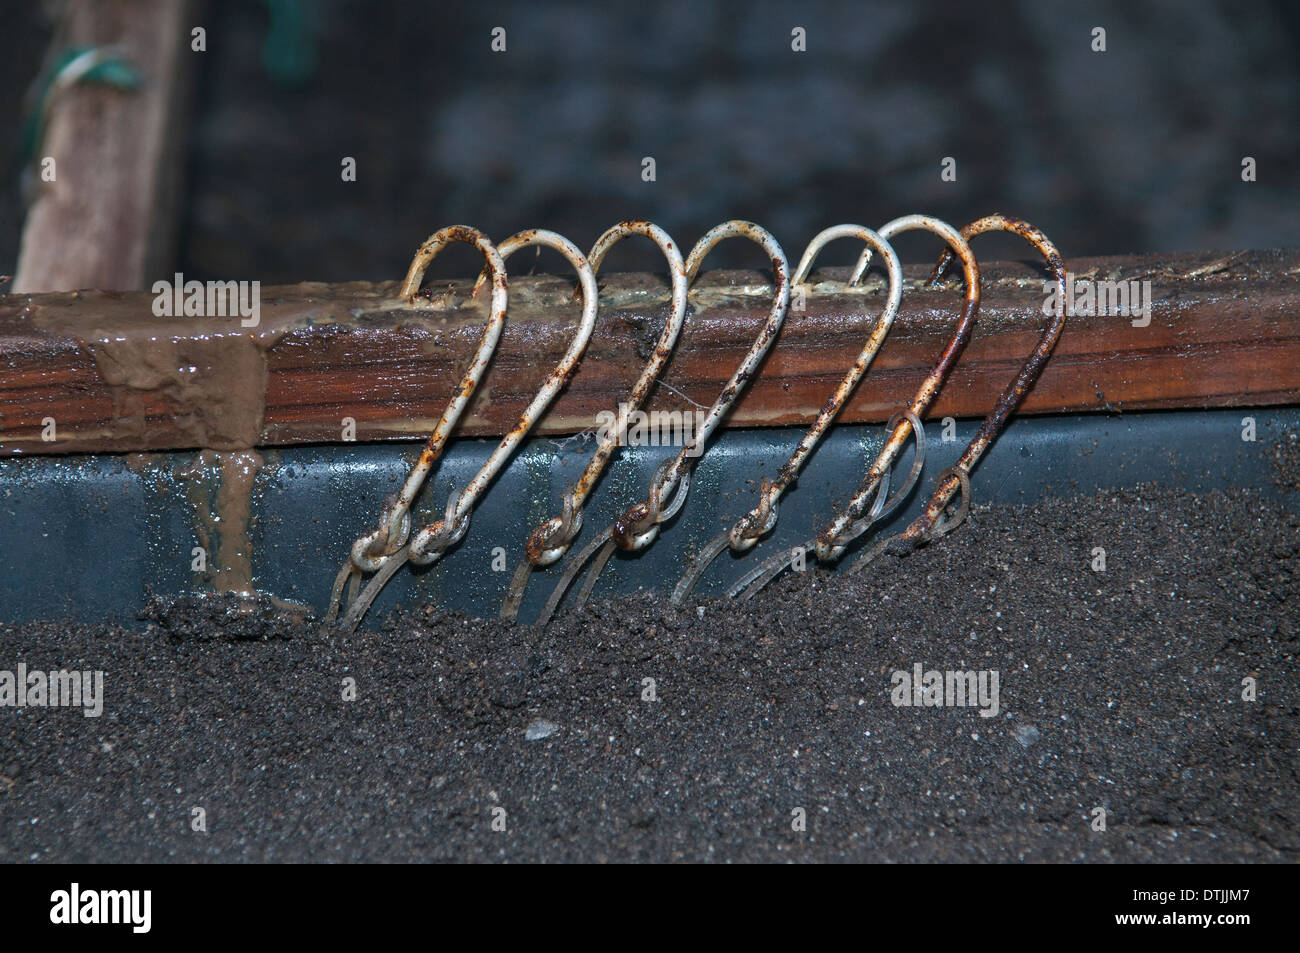 Hooks prepared for long-line fishing gear. Sao Miguel, Azores Archipelago  Stock Photo - Alamy